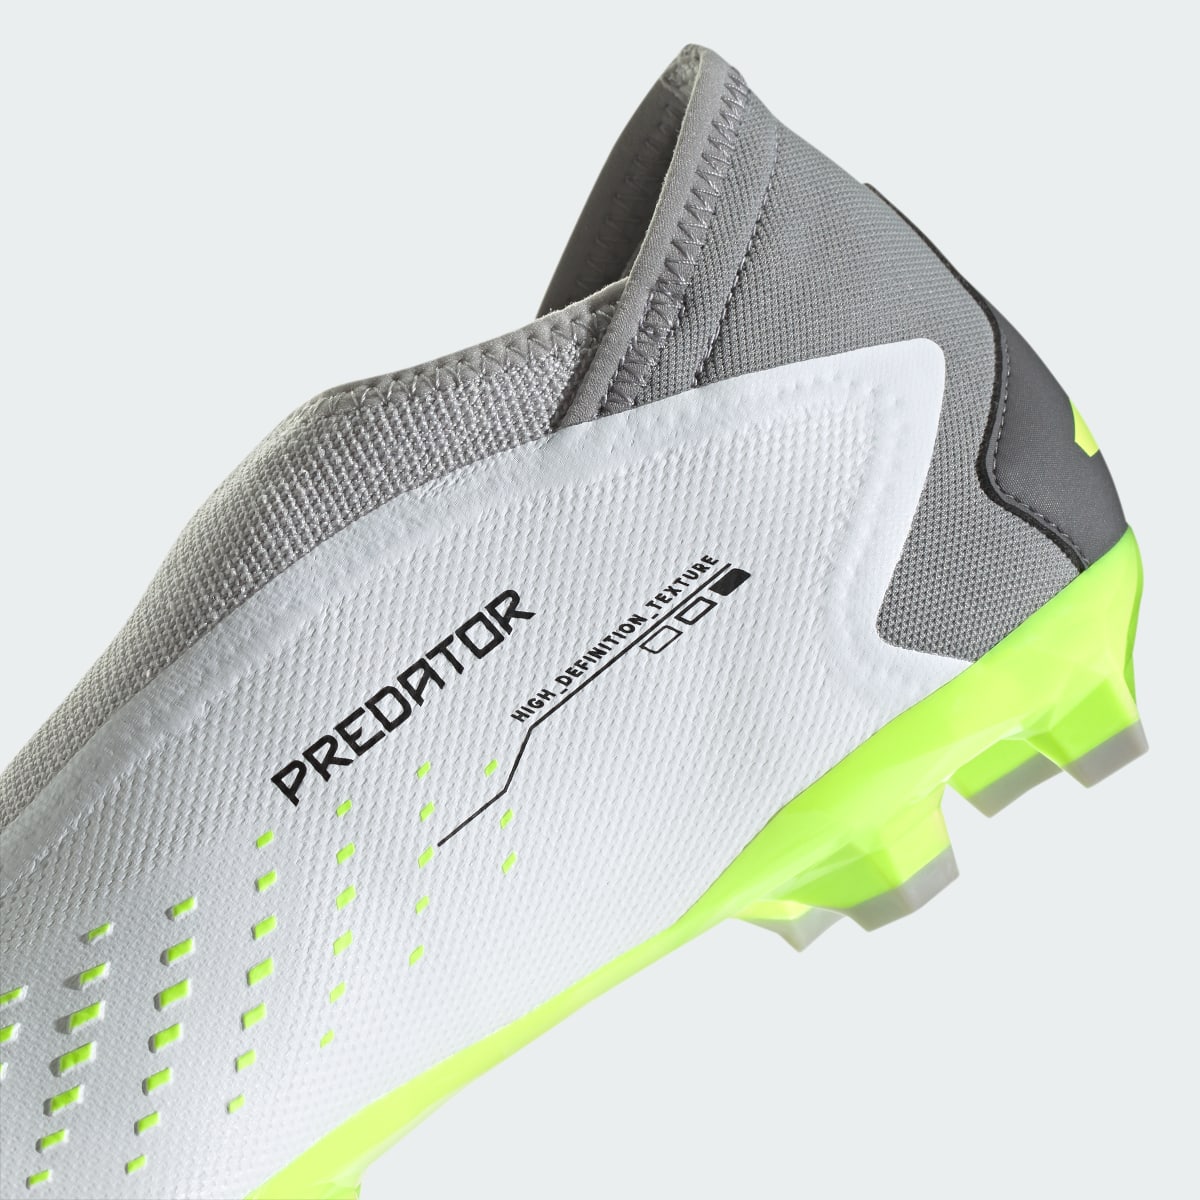 Adidas Predator Accuracy.3 Laceless Firm Ground Soccer Cleats. 9